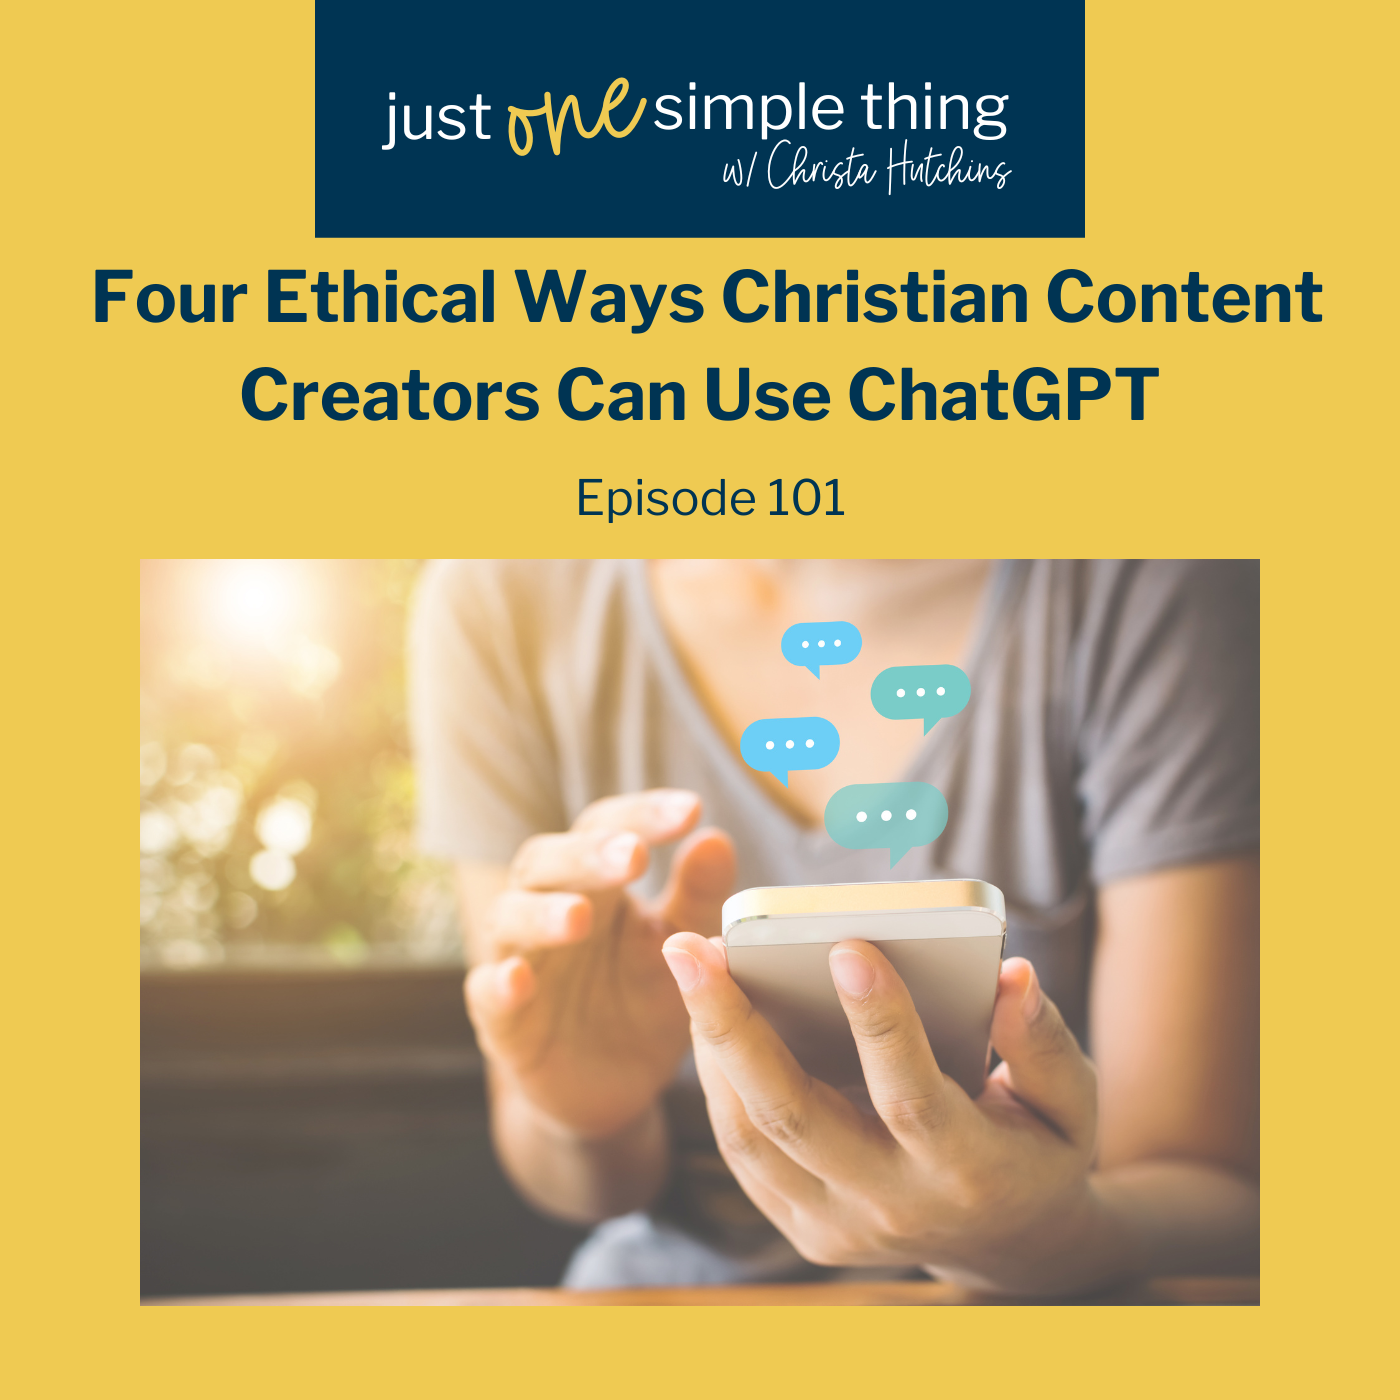 Four Ethical Ways Christian Content Creators Can Use ChatGPT